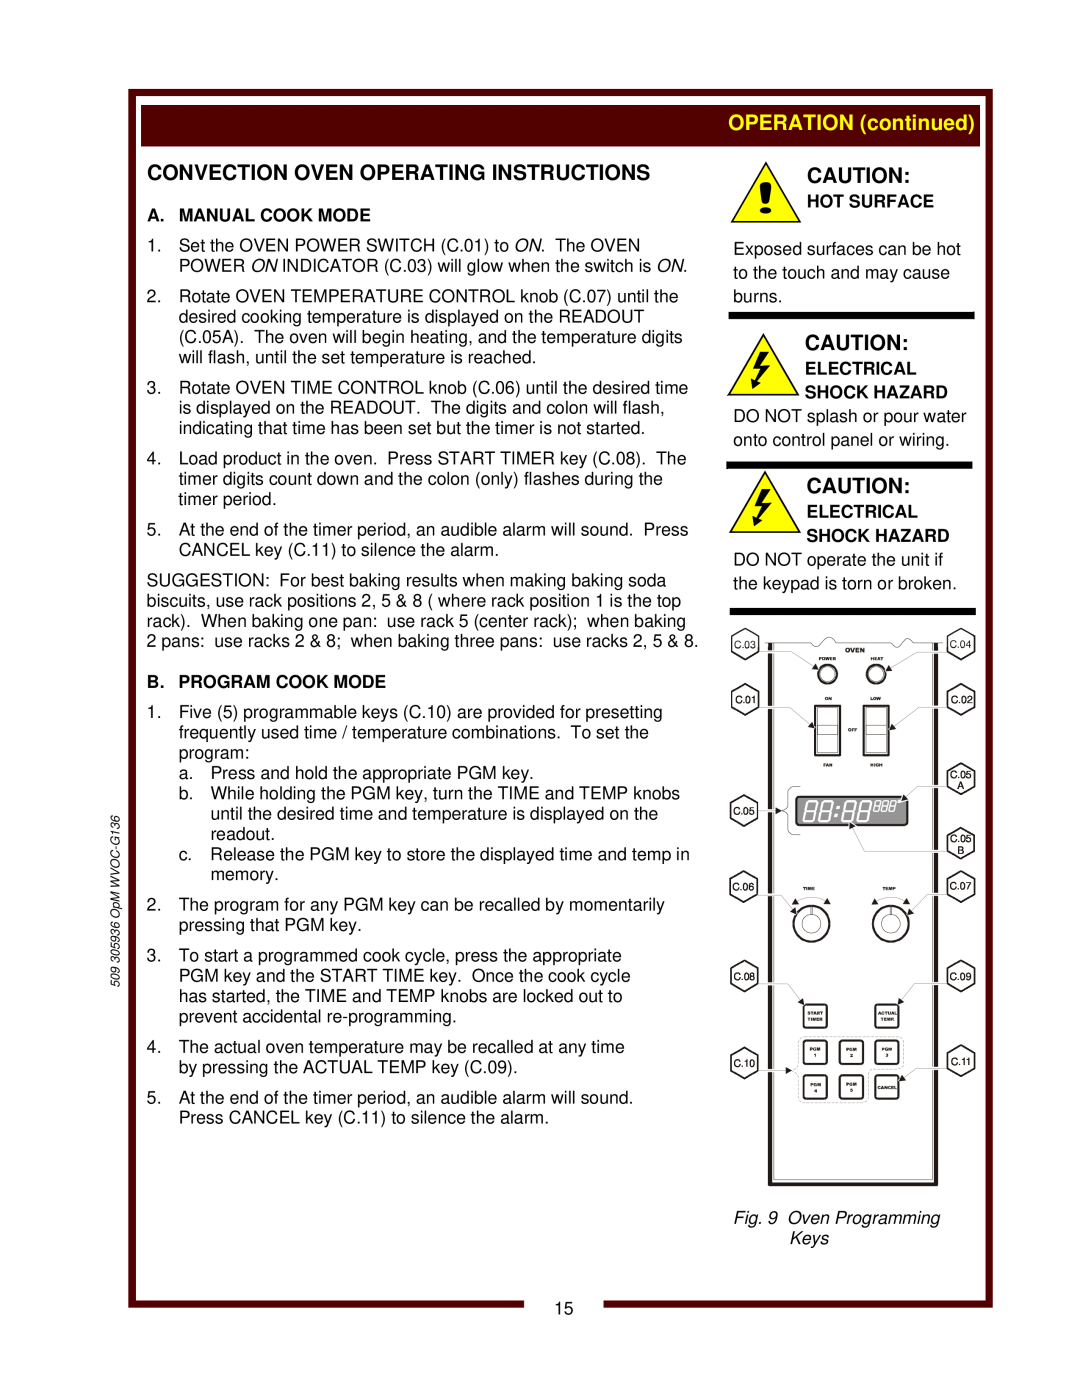 Wells WVOC-G136 Convection Oven Operating Instructions, A. Manual Cook Mode, B. Program Cook Mode, Electrical, Hot Surface 